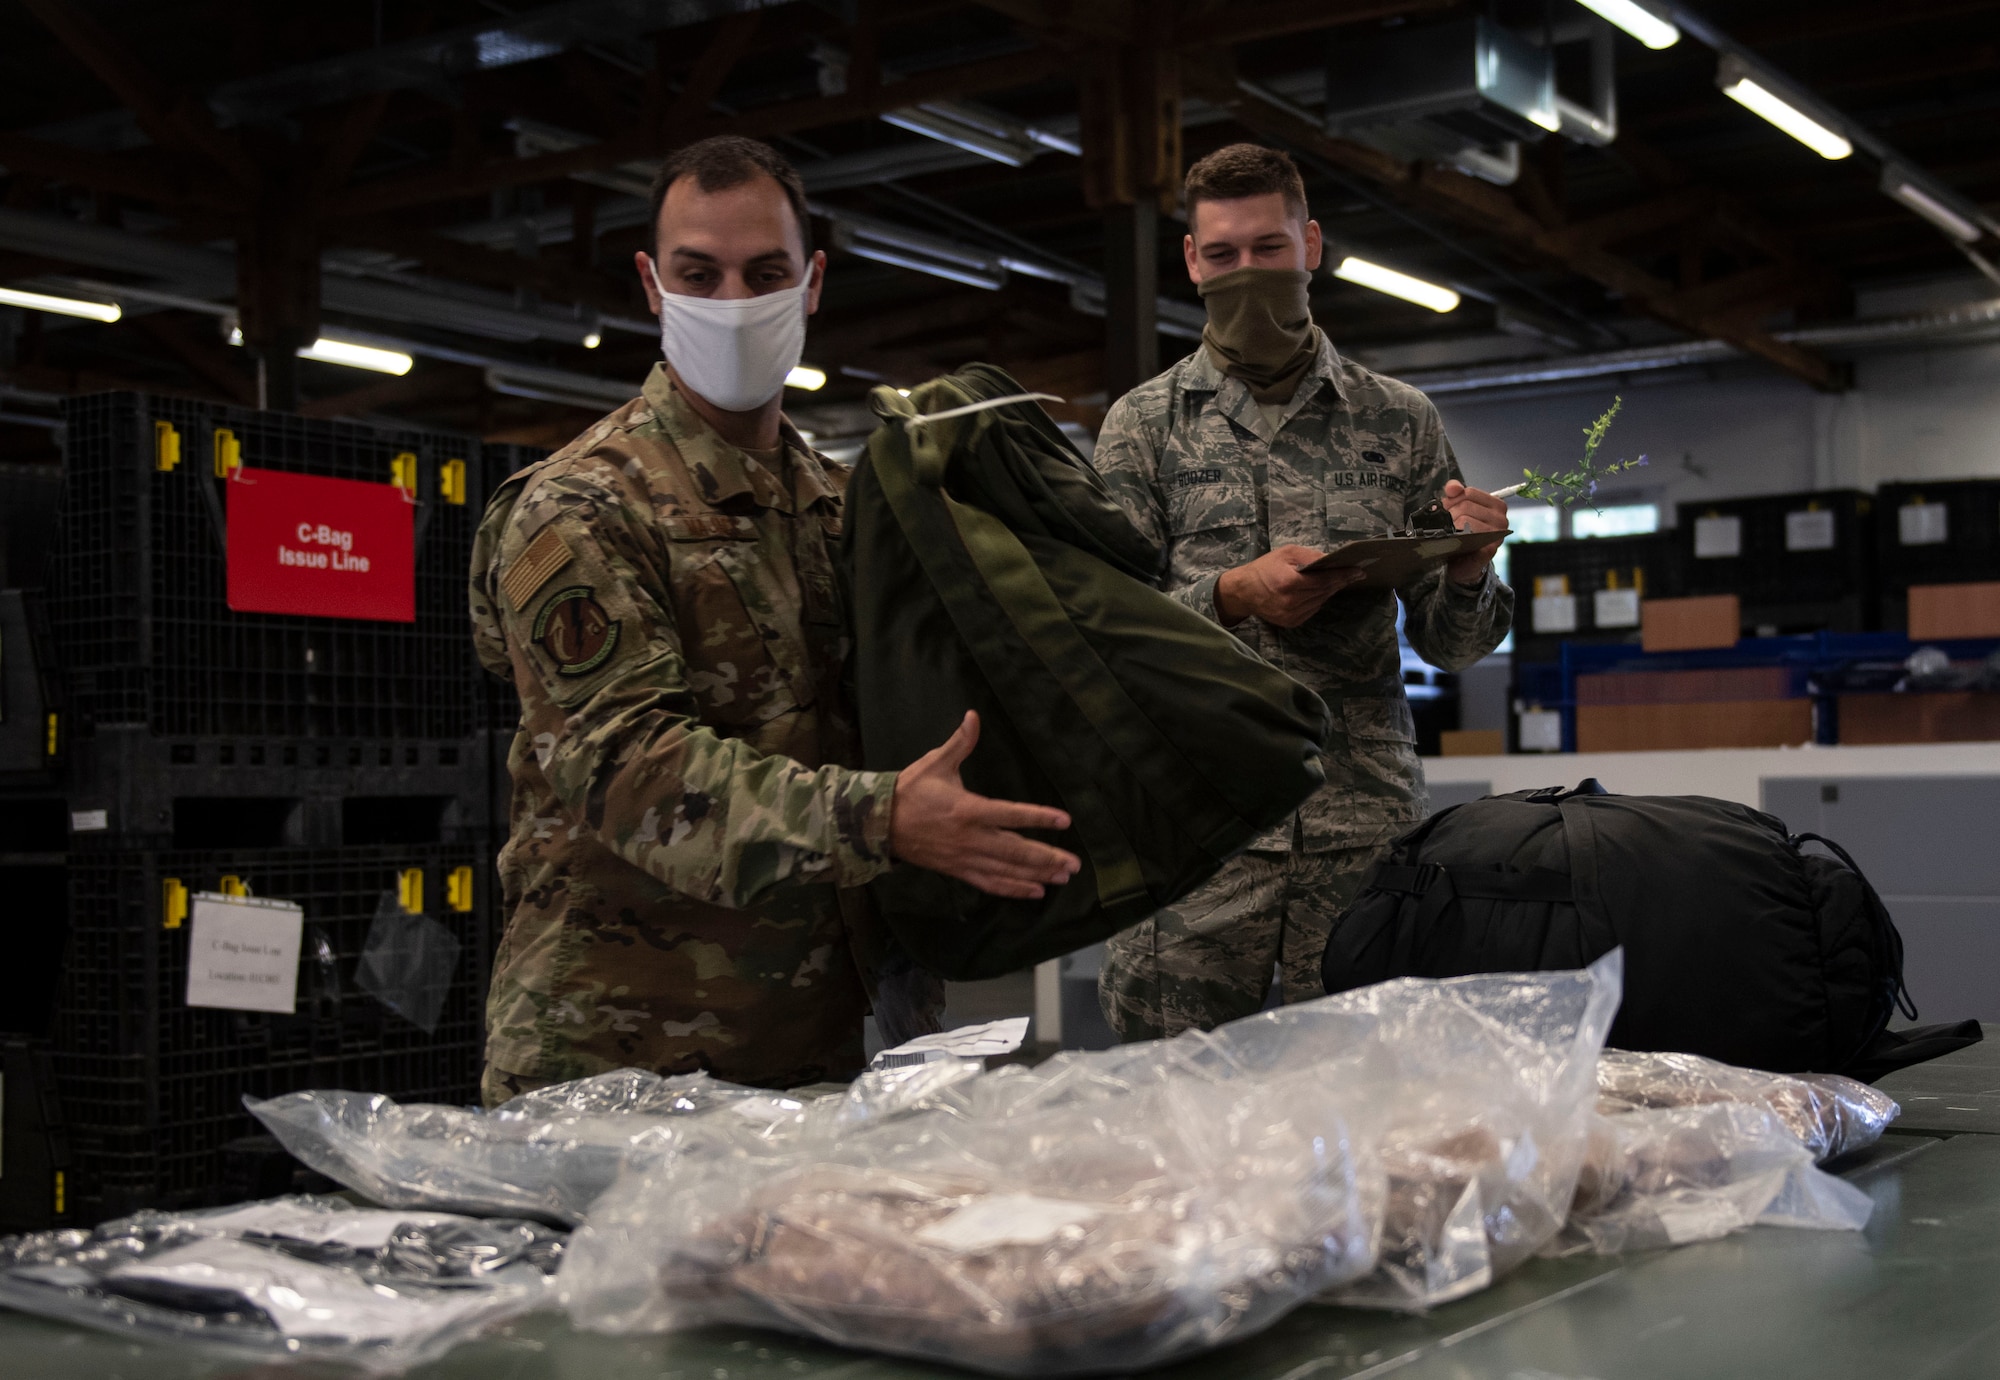 U.S. Air Force Tech Sgt. Mark Majack, left, 52nd Logistics Readiness Squadron section chief of personal property, passenger travel office, and Airman 1st Class Joshua Boozer, right, 52nd LRS Individual Protective Equipment apprentice, demonstrate putting a deployment bag together, June 4, 2020, at Spangdahlem Air Base, Germany. The 52nd LRS IPE Airmen are responsible for ensuring Airmen are properly equipped with gear needed for taskings, deployments, and temporary duty travel. (U.S. Air Force photo by Senior Airman Melody W. Howley)